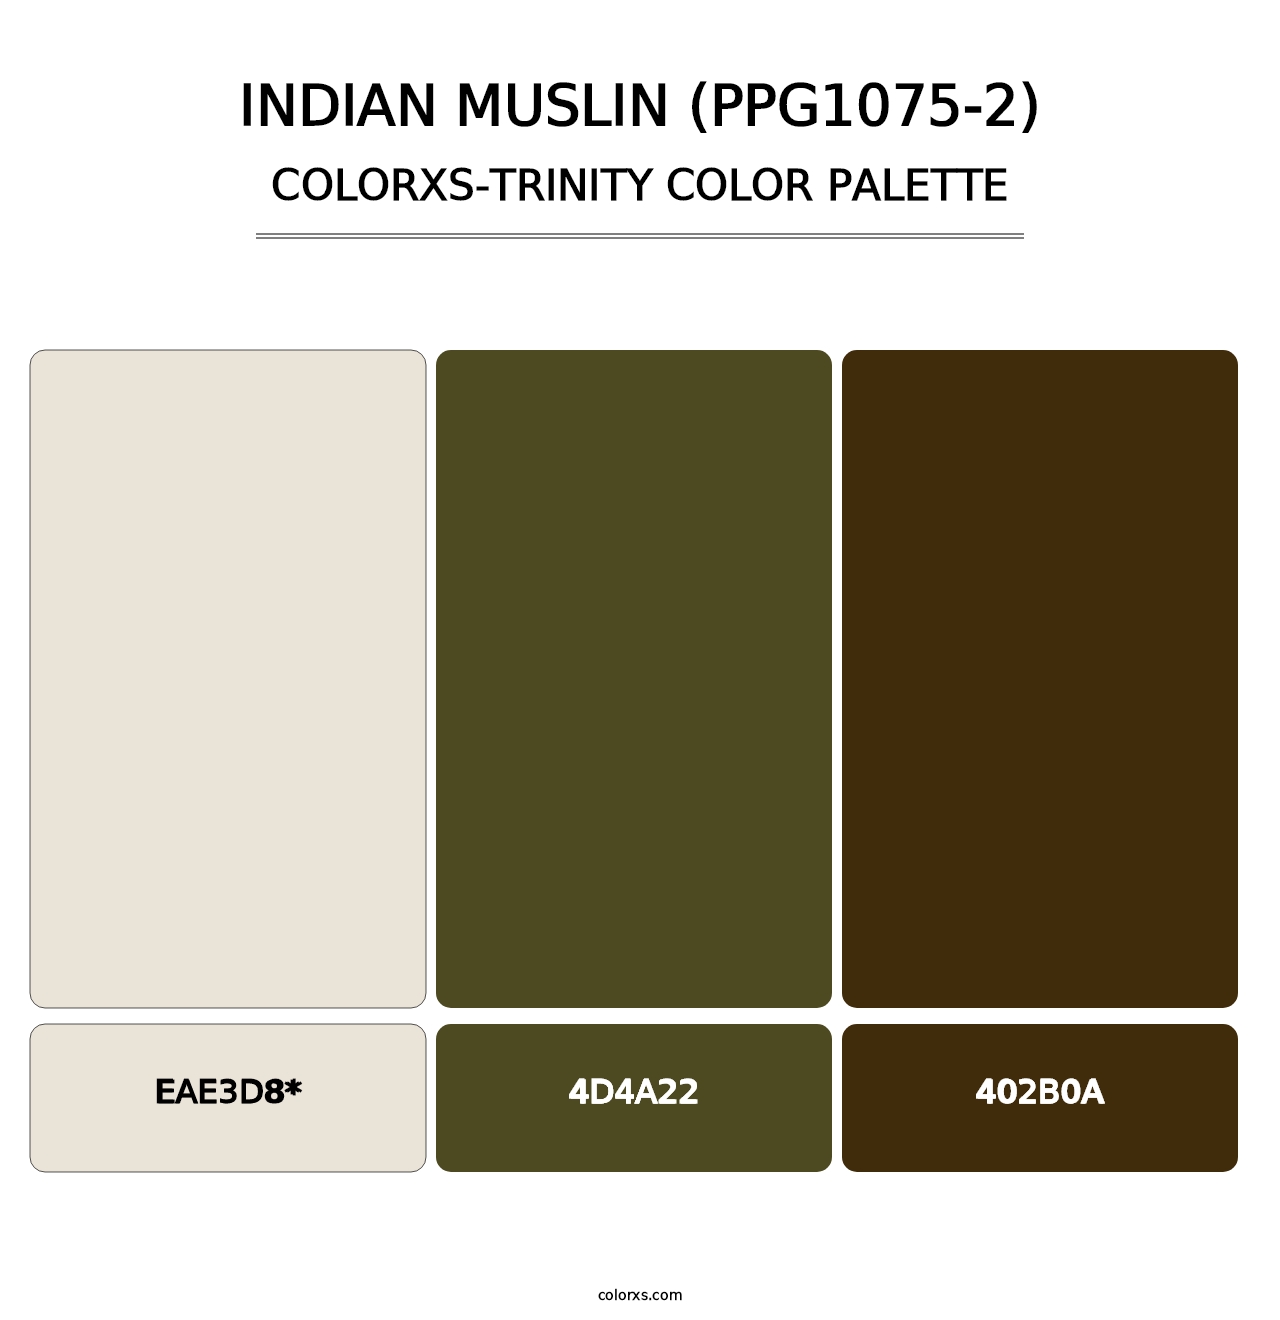 Indian Muslin (PPG1075-2) - Colorxs Trinity Palette